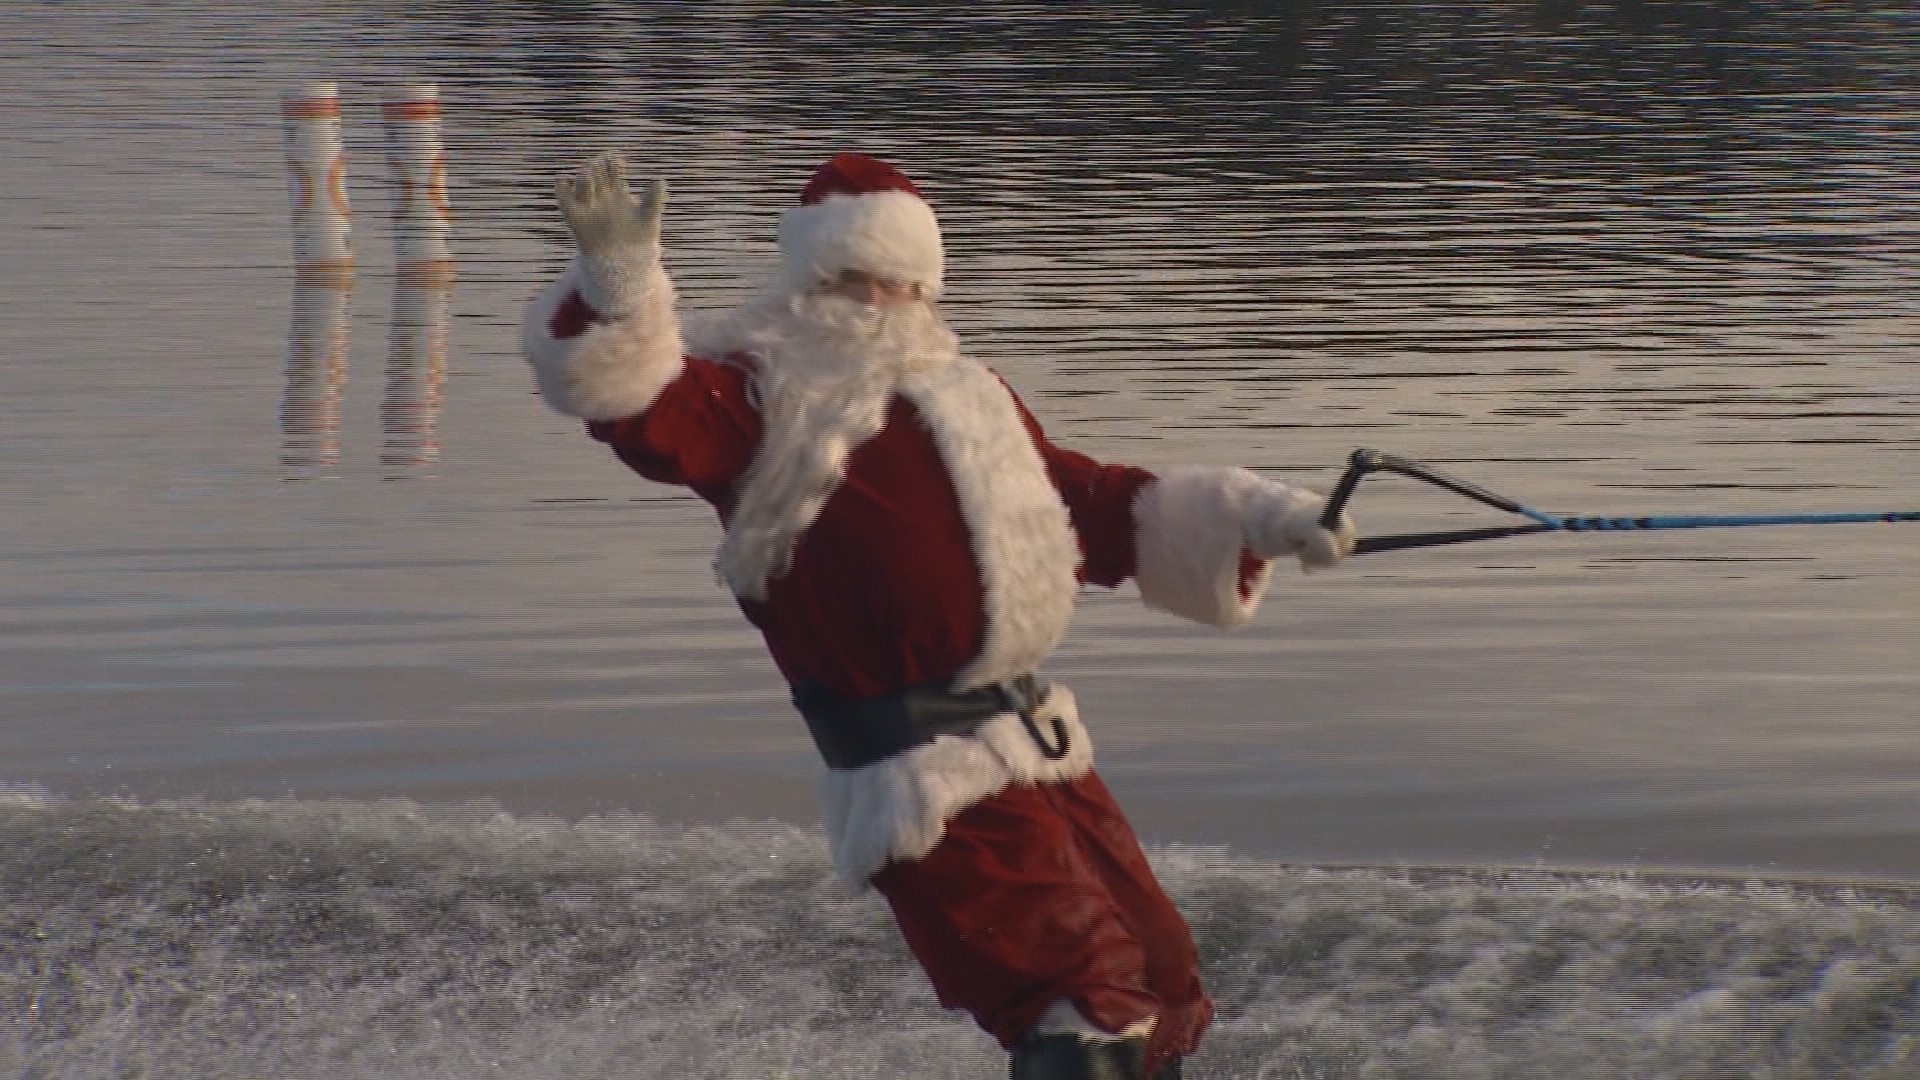 Santa Claus took a break from his sleigh and put on his water skis to take a couple laps around Lake Stevens Christmas morning.